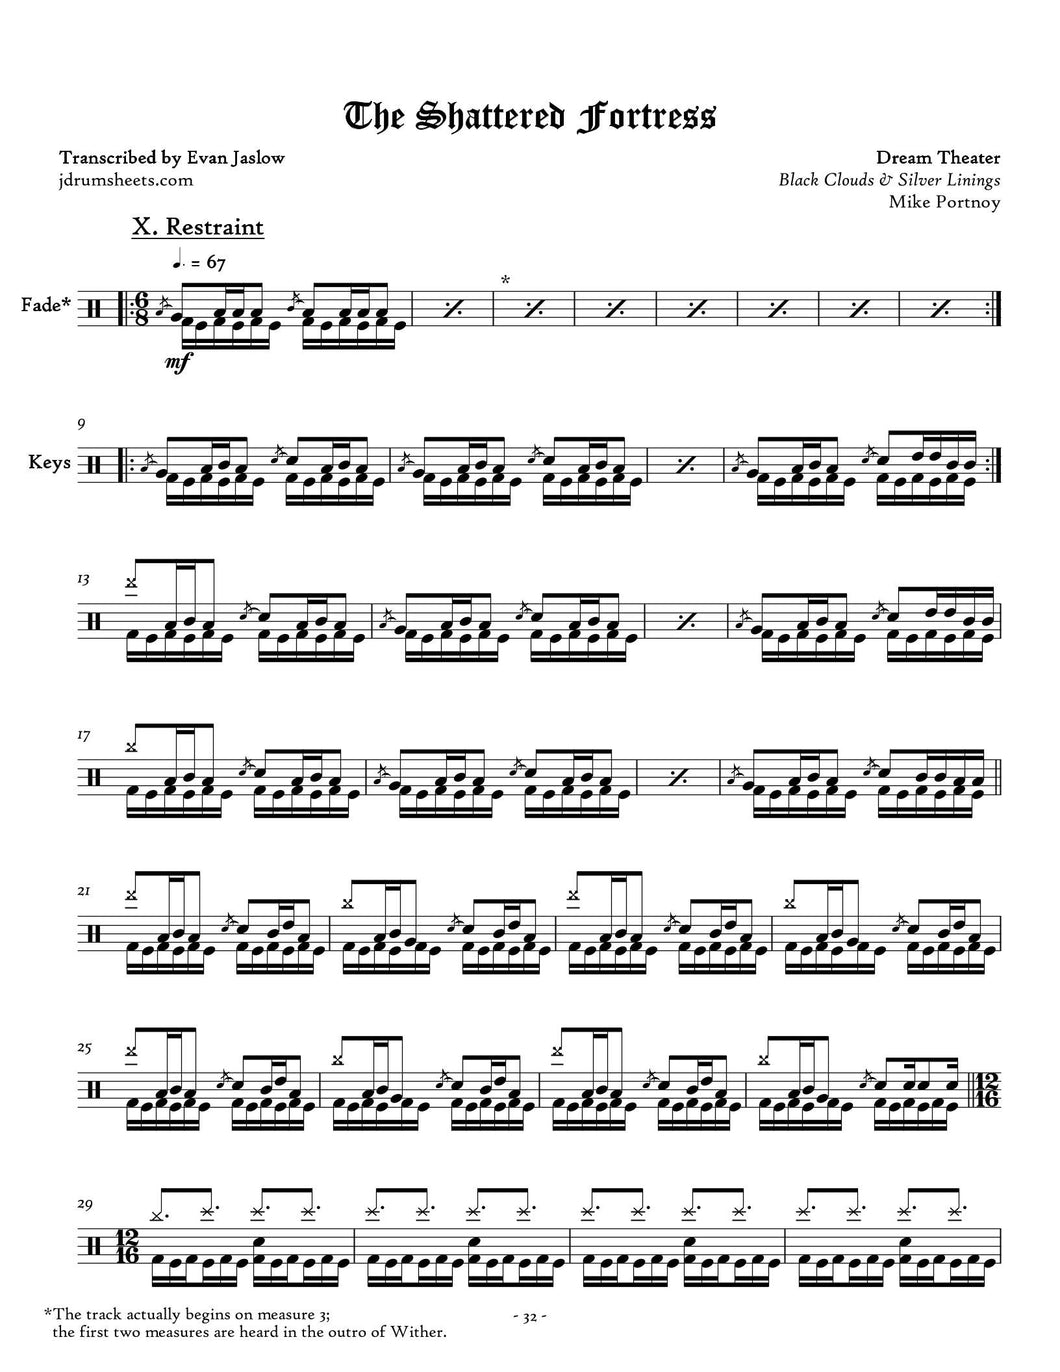 The Shattered Fortress - Dream Theater - Full Drum Transcription / Drum Sheet Music - Jaslow Drum Sheets